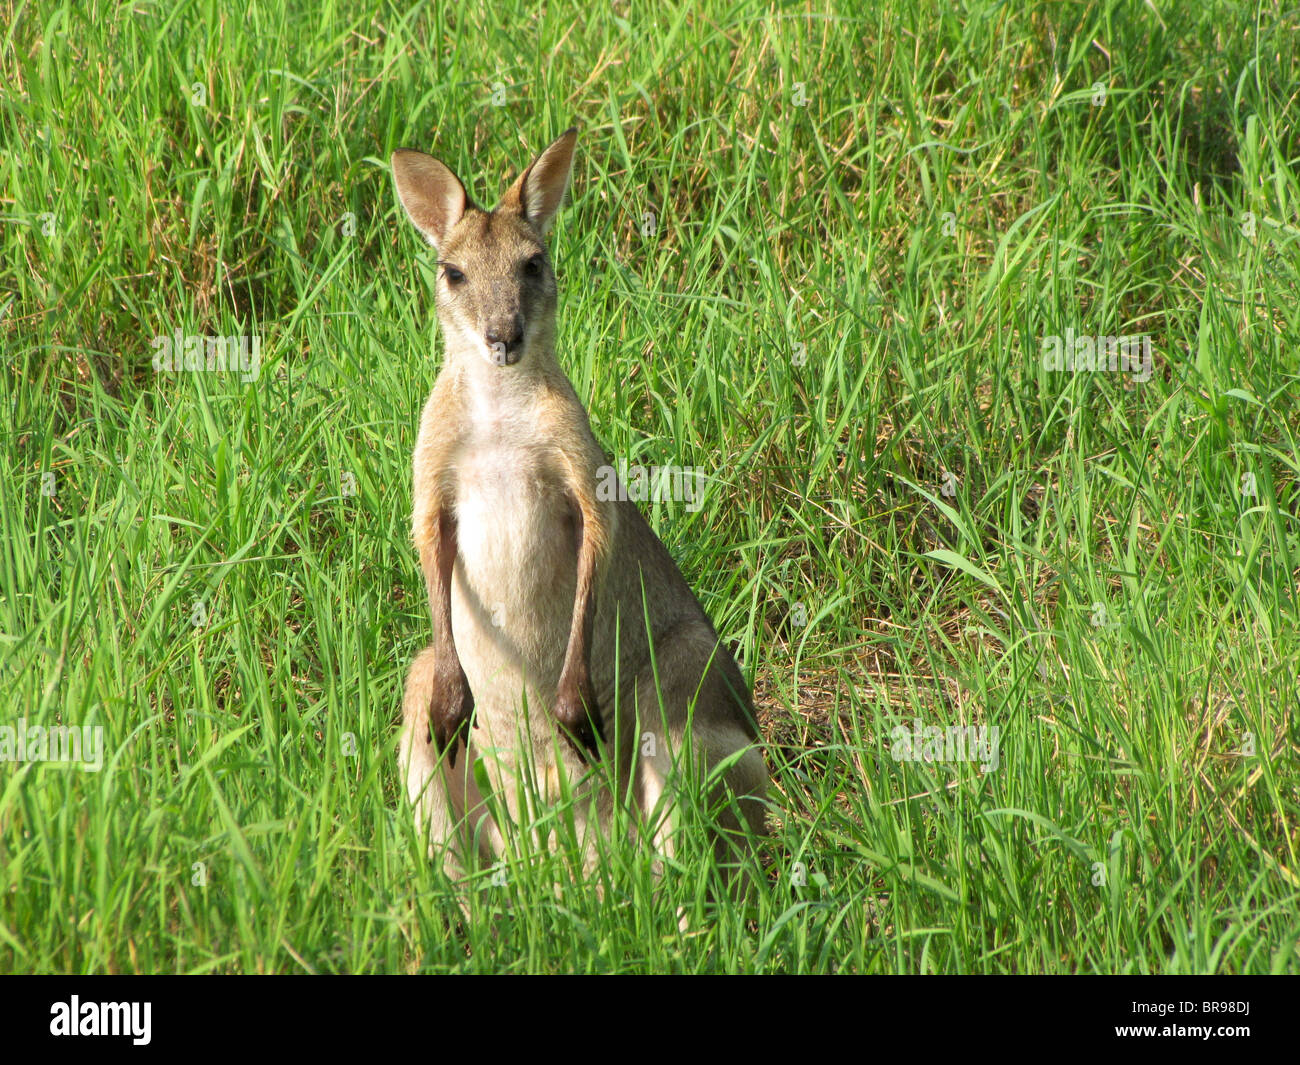 An Agile Wallaby (Macropus agilis) standing in tall grass at Fogg Dam Conservation Reserve, Northern Territory, Australia. Stock Photo